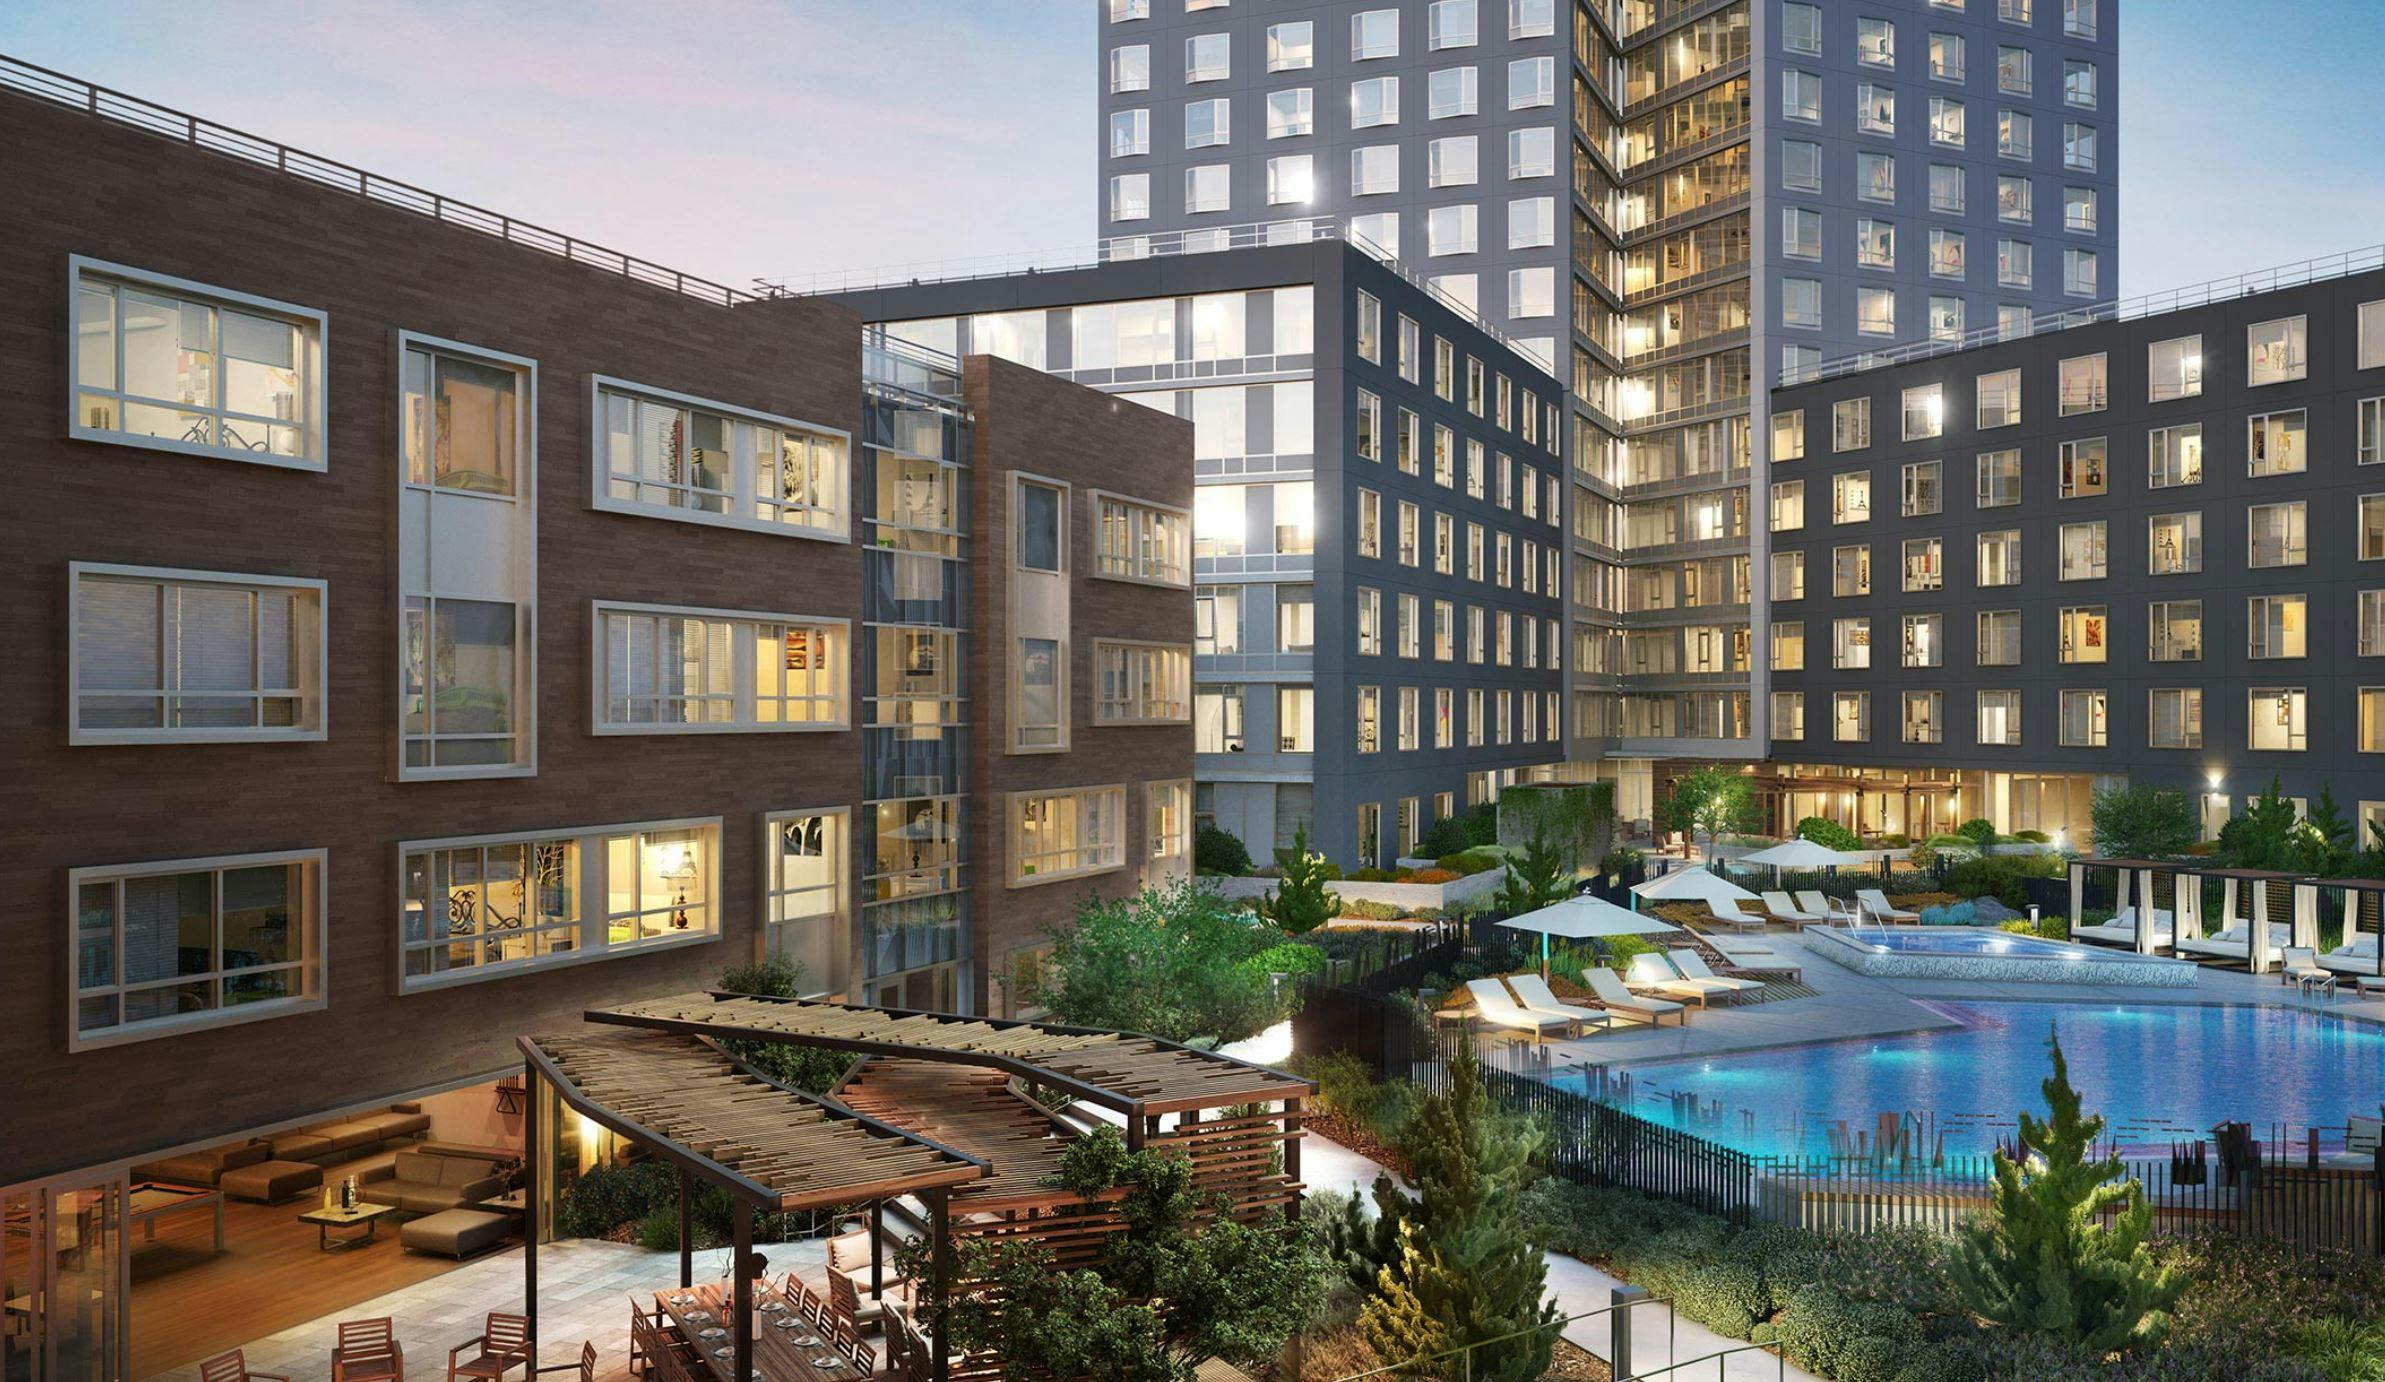 One Mission Bay offers many amenities to its residents, including but not limited to a pool with poolside cabanas, and sauna. 